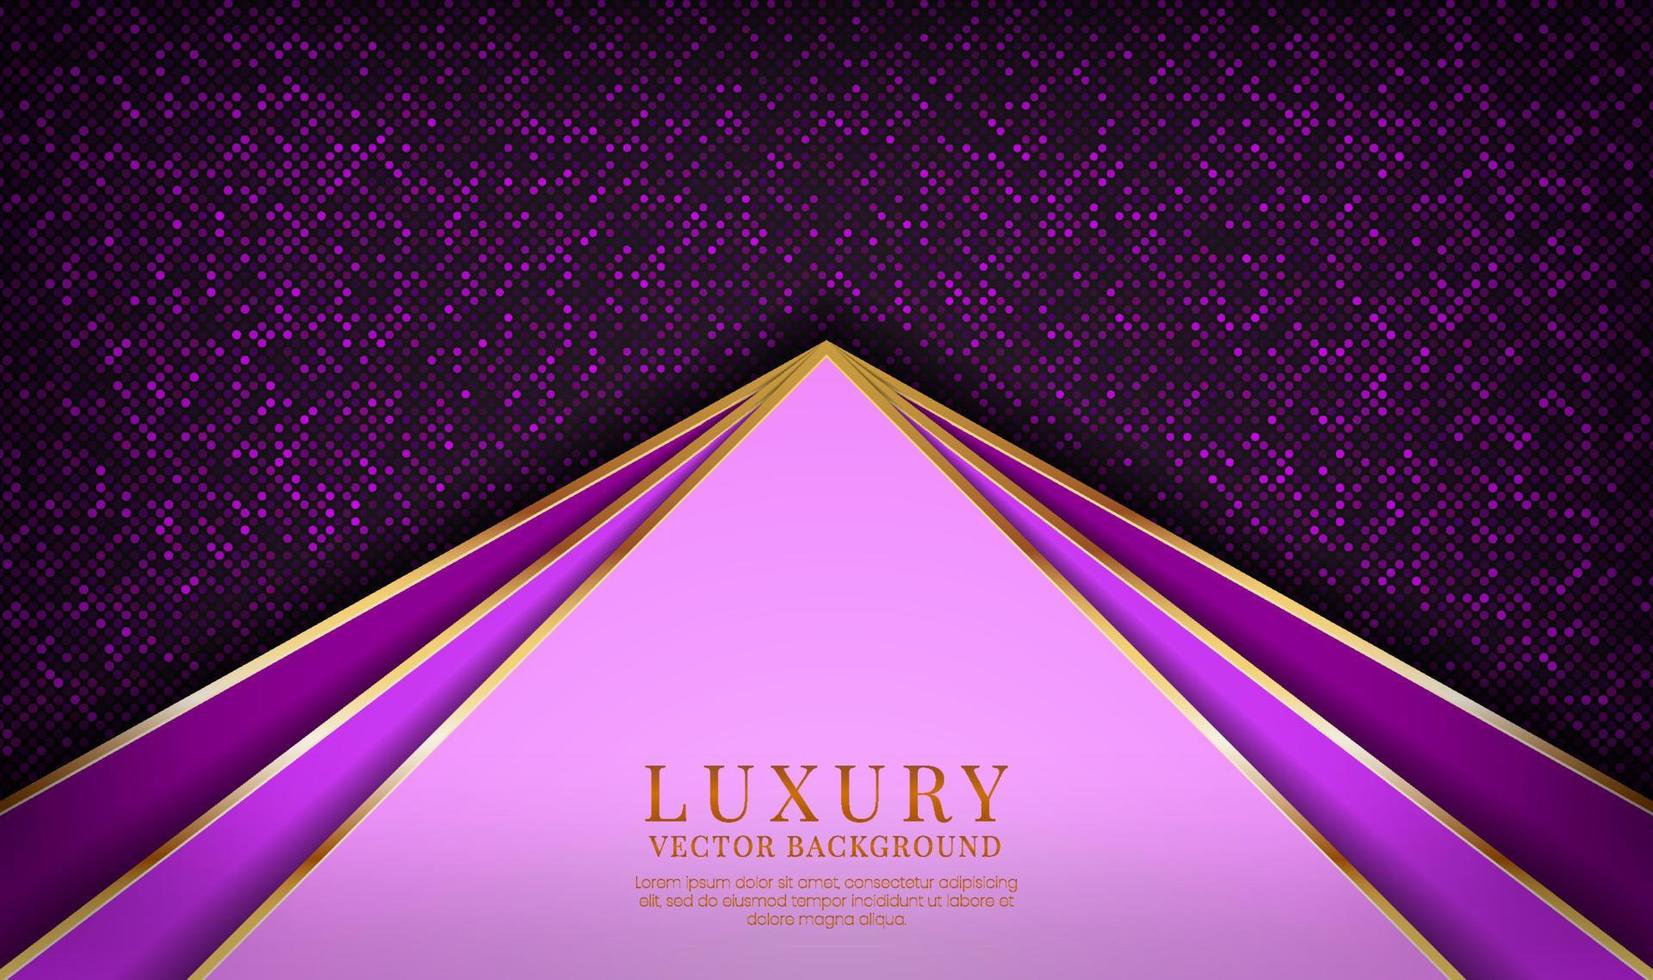 3D purple luxury abstract background overlap layers on dark space with golden stripes effect decoration. Graphic design element future style concept for flyer, card, brochure cover, or landing page vector